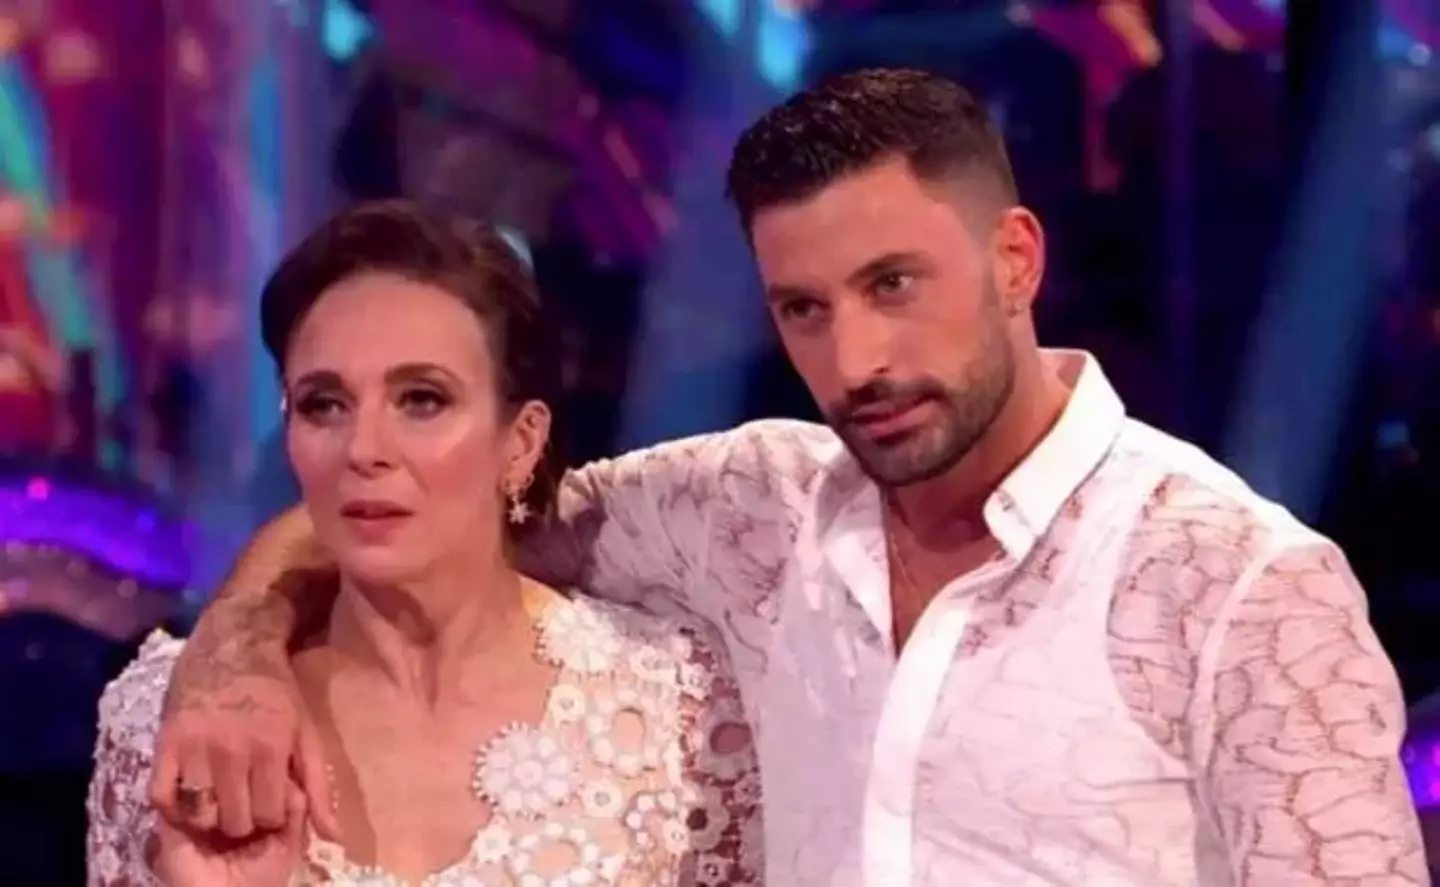 Amanda dropped out of Strictly earlier this week.